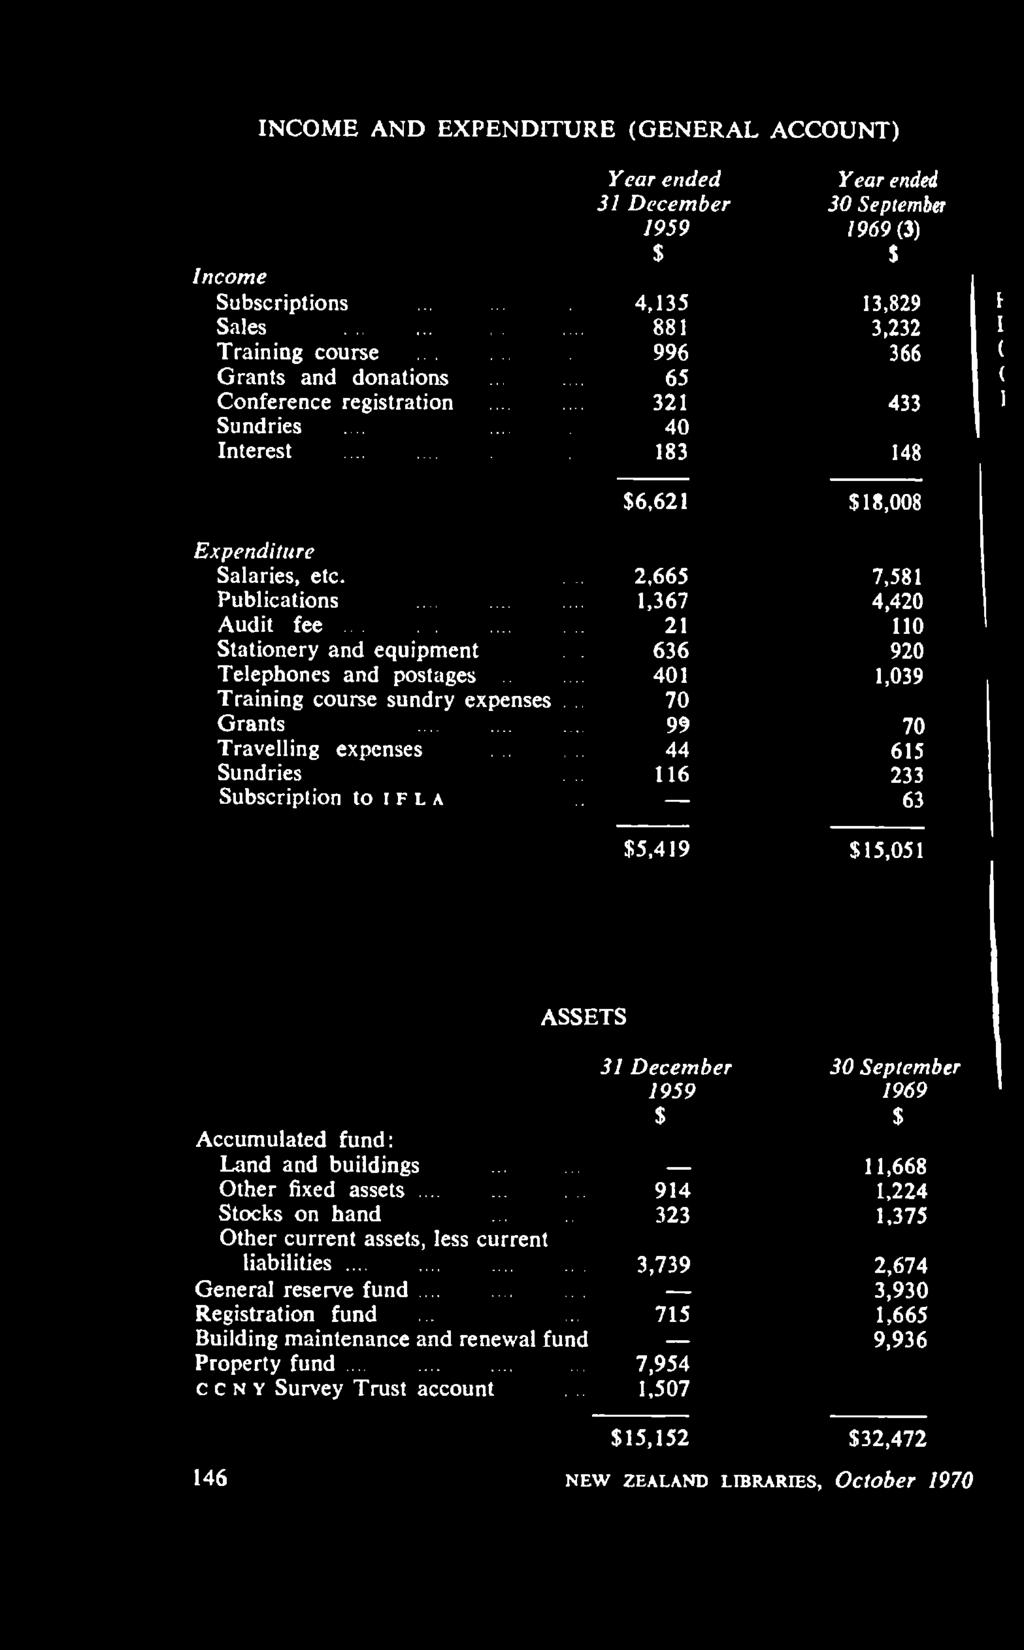 615 233 63 $15,051 ASSETS 31 December 1959 $ Accumulated fund: Land and buildings...... O ther fixed a s s e ts...... 914 Stocks on hand...... 323 Other current assets, less current liab ilities.